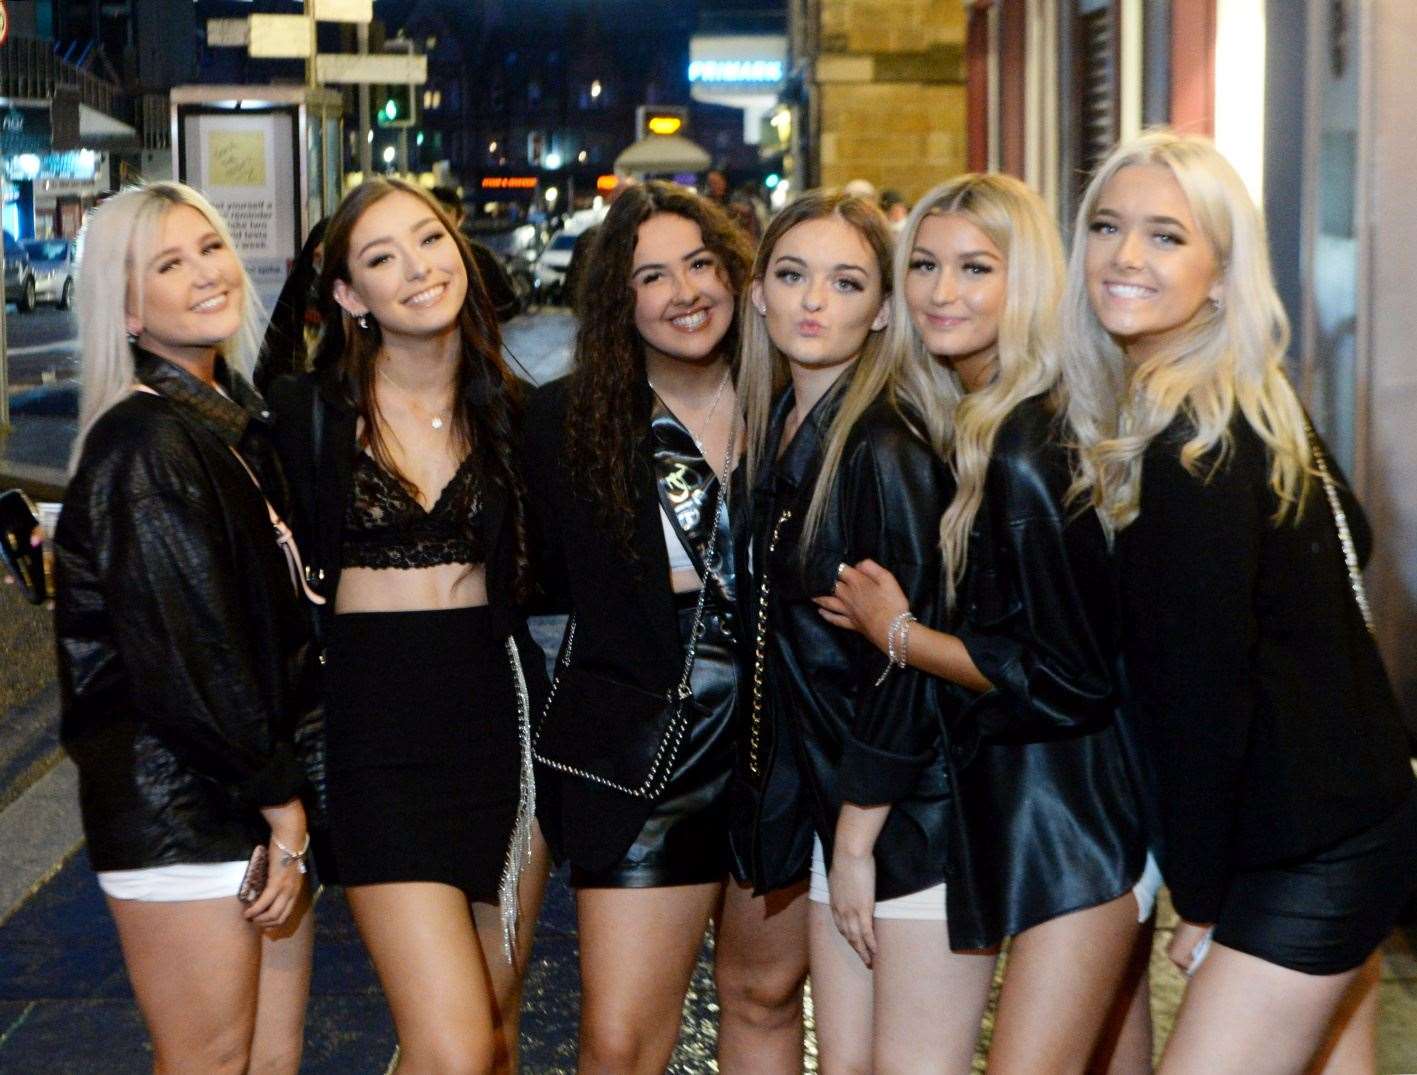 Lauren Maciver (3rd from left) celebrating her 18th birthday with friends. Picture: James Mackenzie.